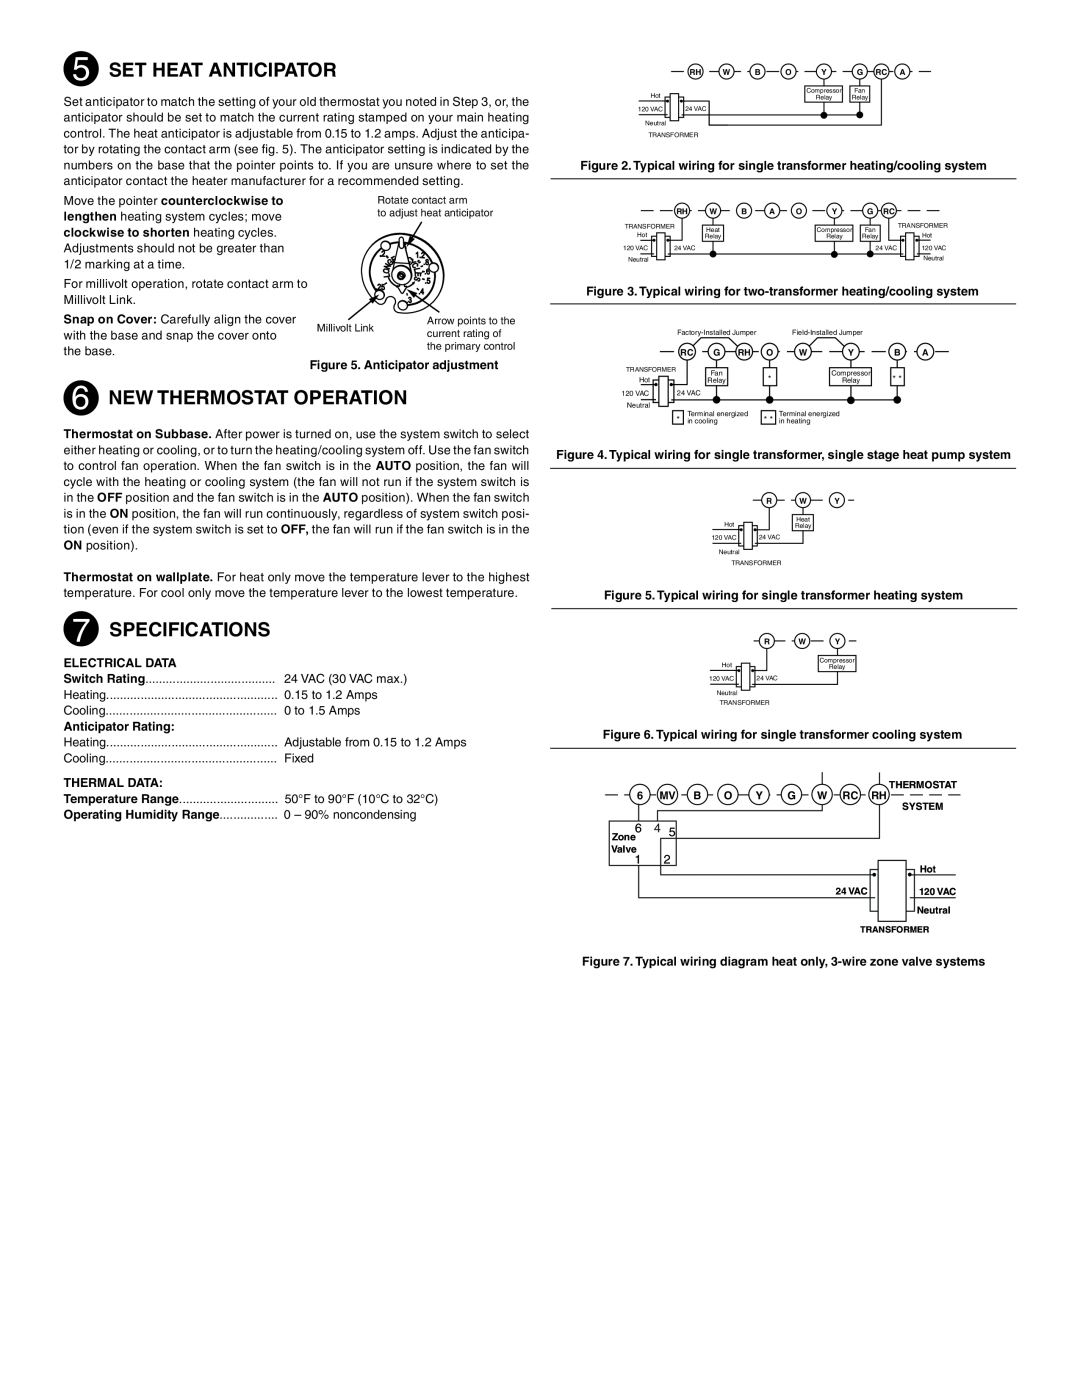 White Rodgers 1F56N-444, 1E56N-444 installation instructions Set Heat Anticipator, New Thermostat Operation, Specifications 